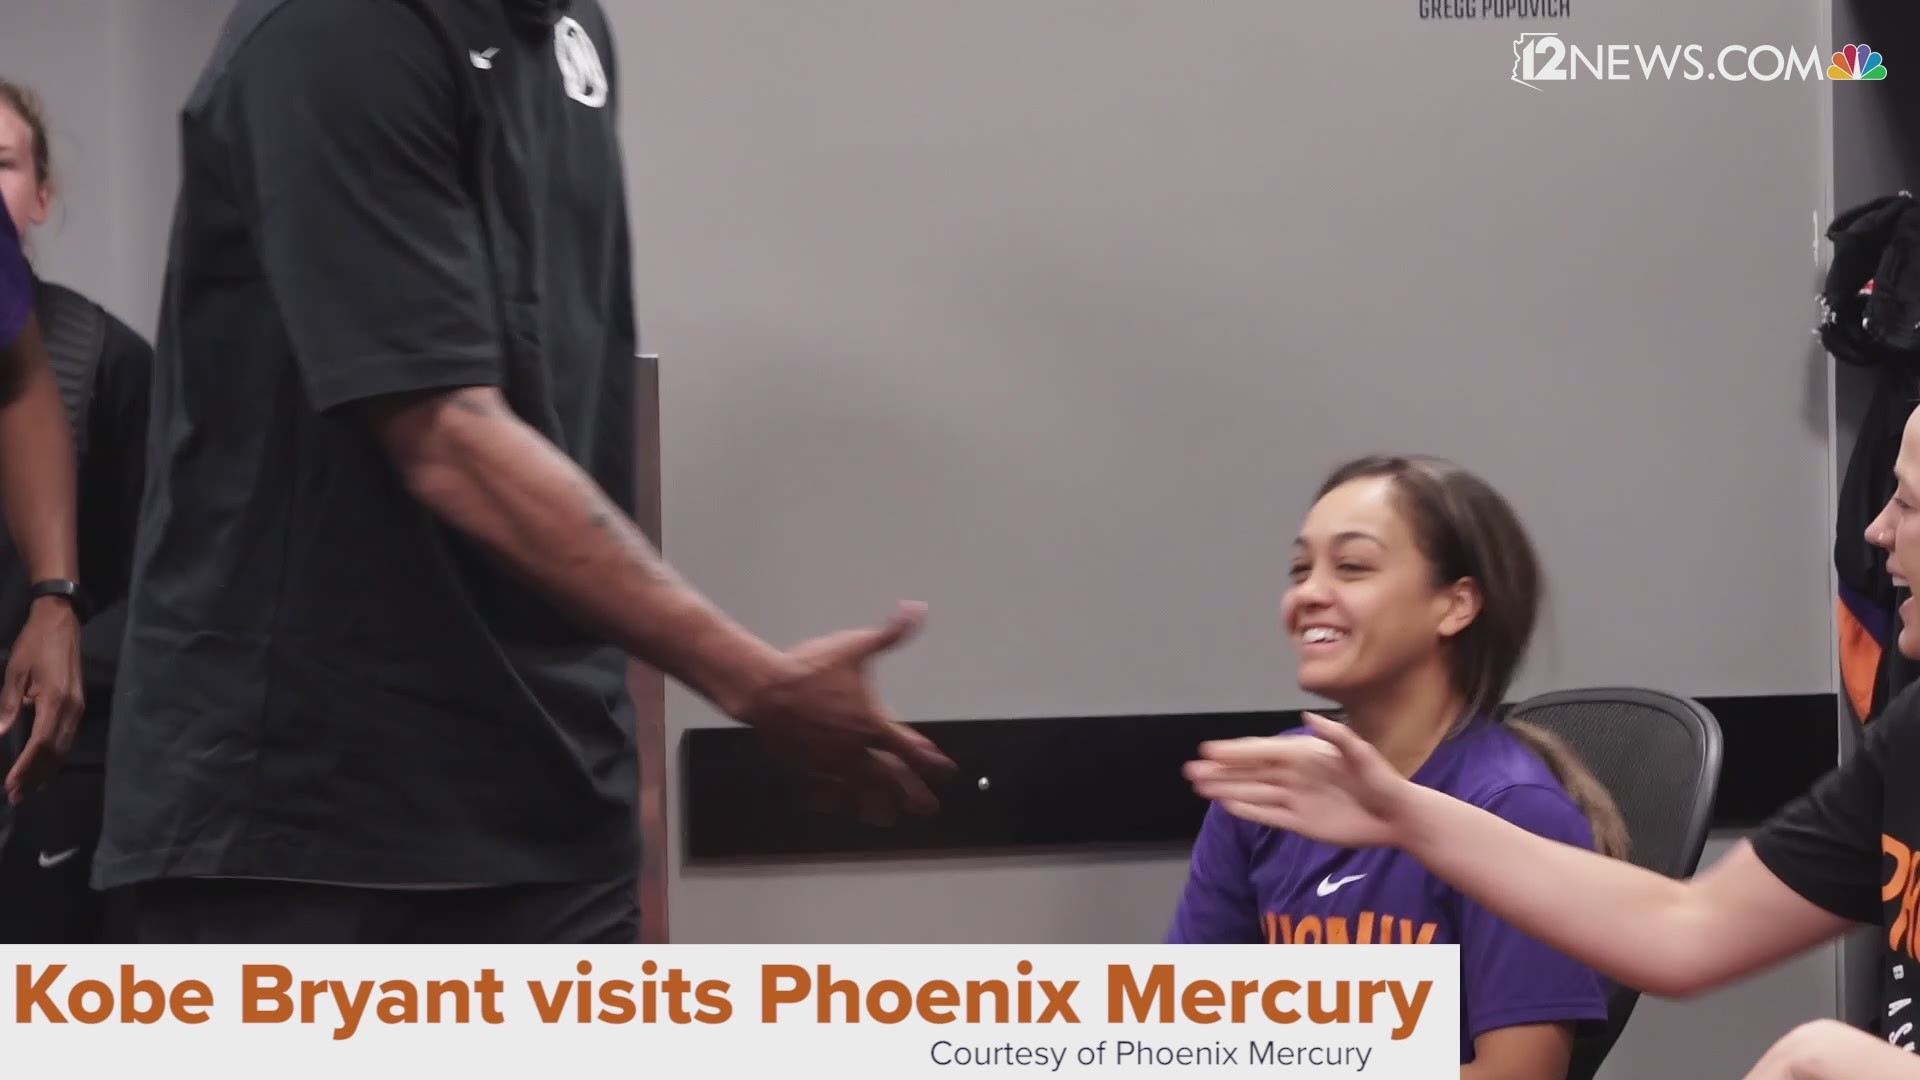 Kobe Bryant brought his daughter's AAU team to the Phoenix Mercury practice Saturday morning and surprised the team.